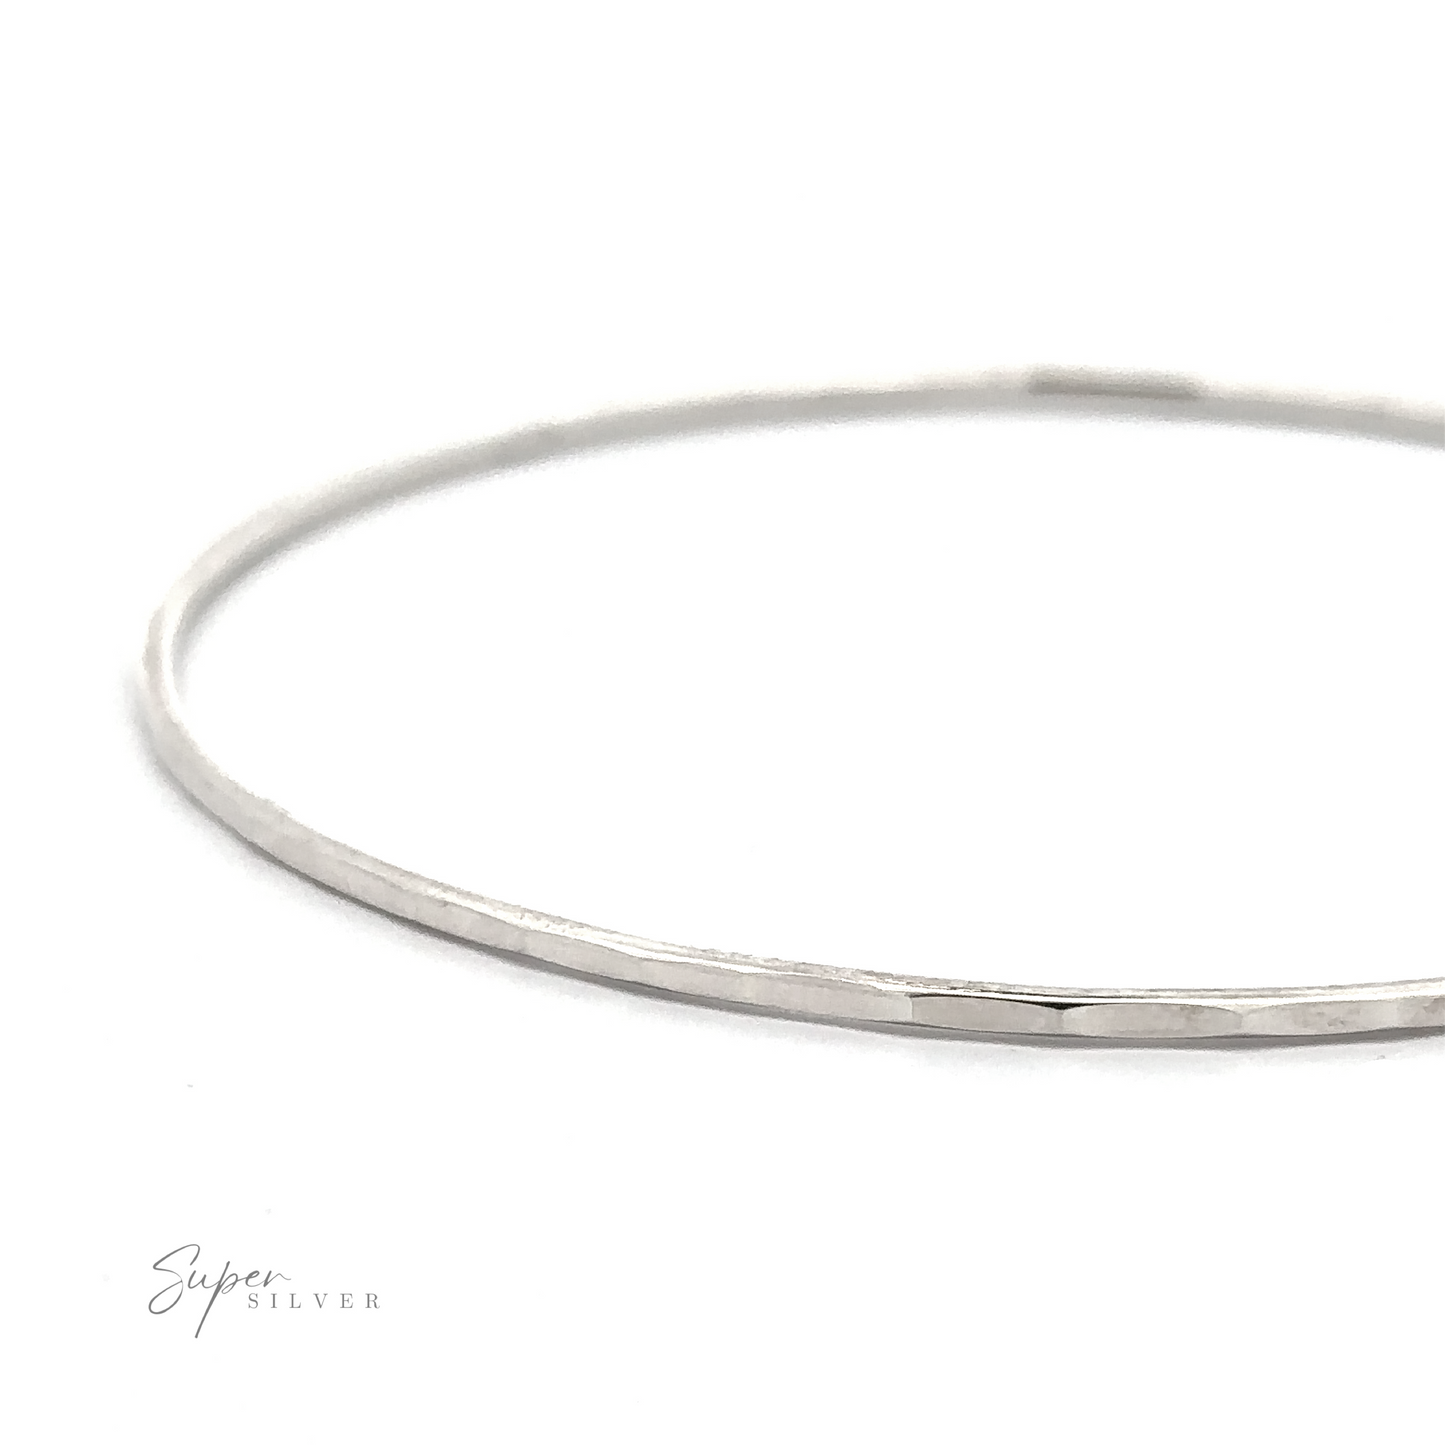 
                  
                    A simple, thin, Faceted Silver Bangle Bracelet with a slightly hammered texture is shown against a white background. The words "Super Silver" are visible in the bottom left corner. This piece of minimalist jewelry adds an elegant touch to any ensemble.
                  
                